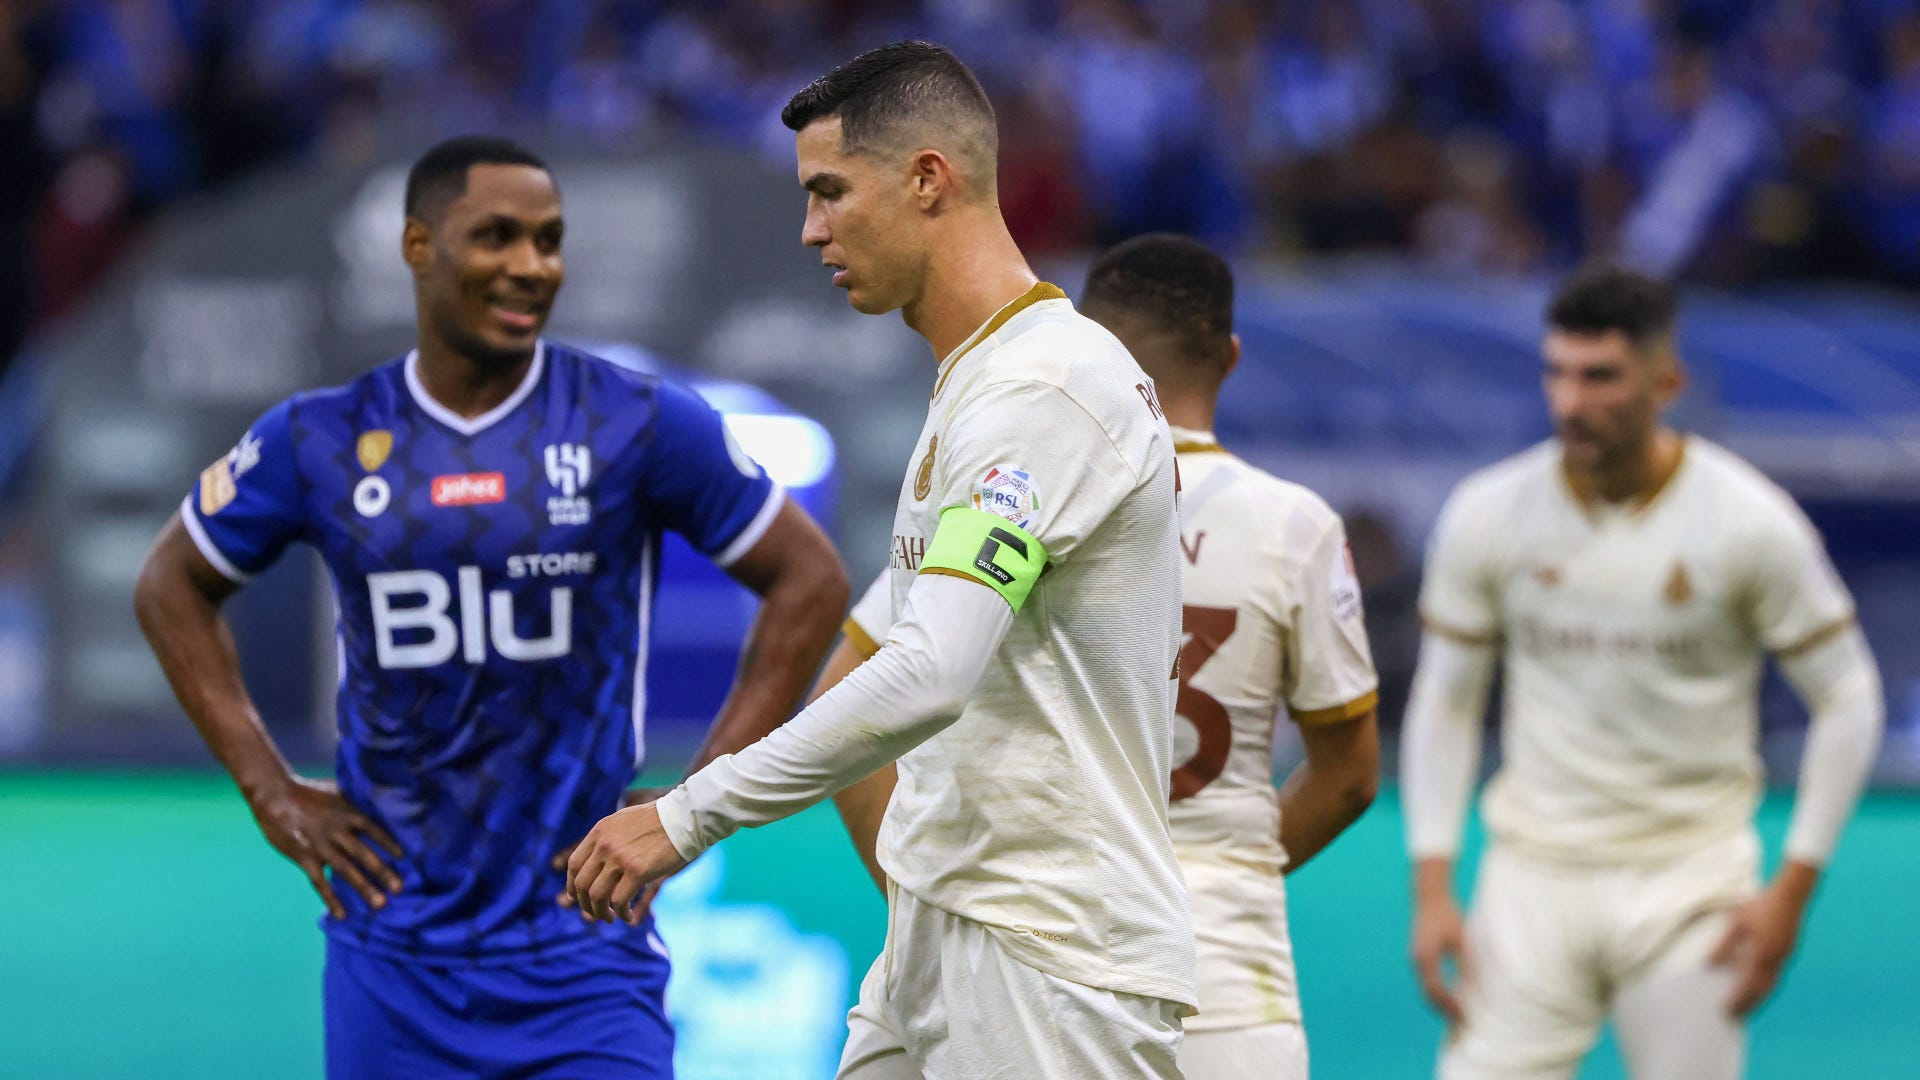 WATCH: Cristiano Ronaldo booked after taking out Al-Hilal player with